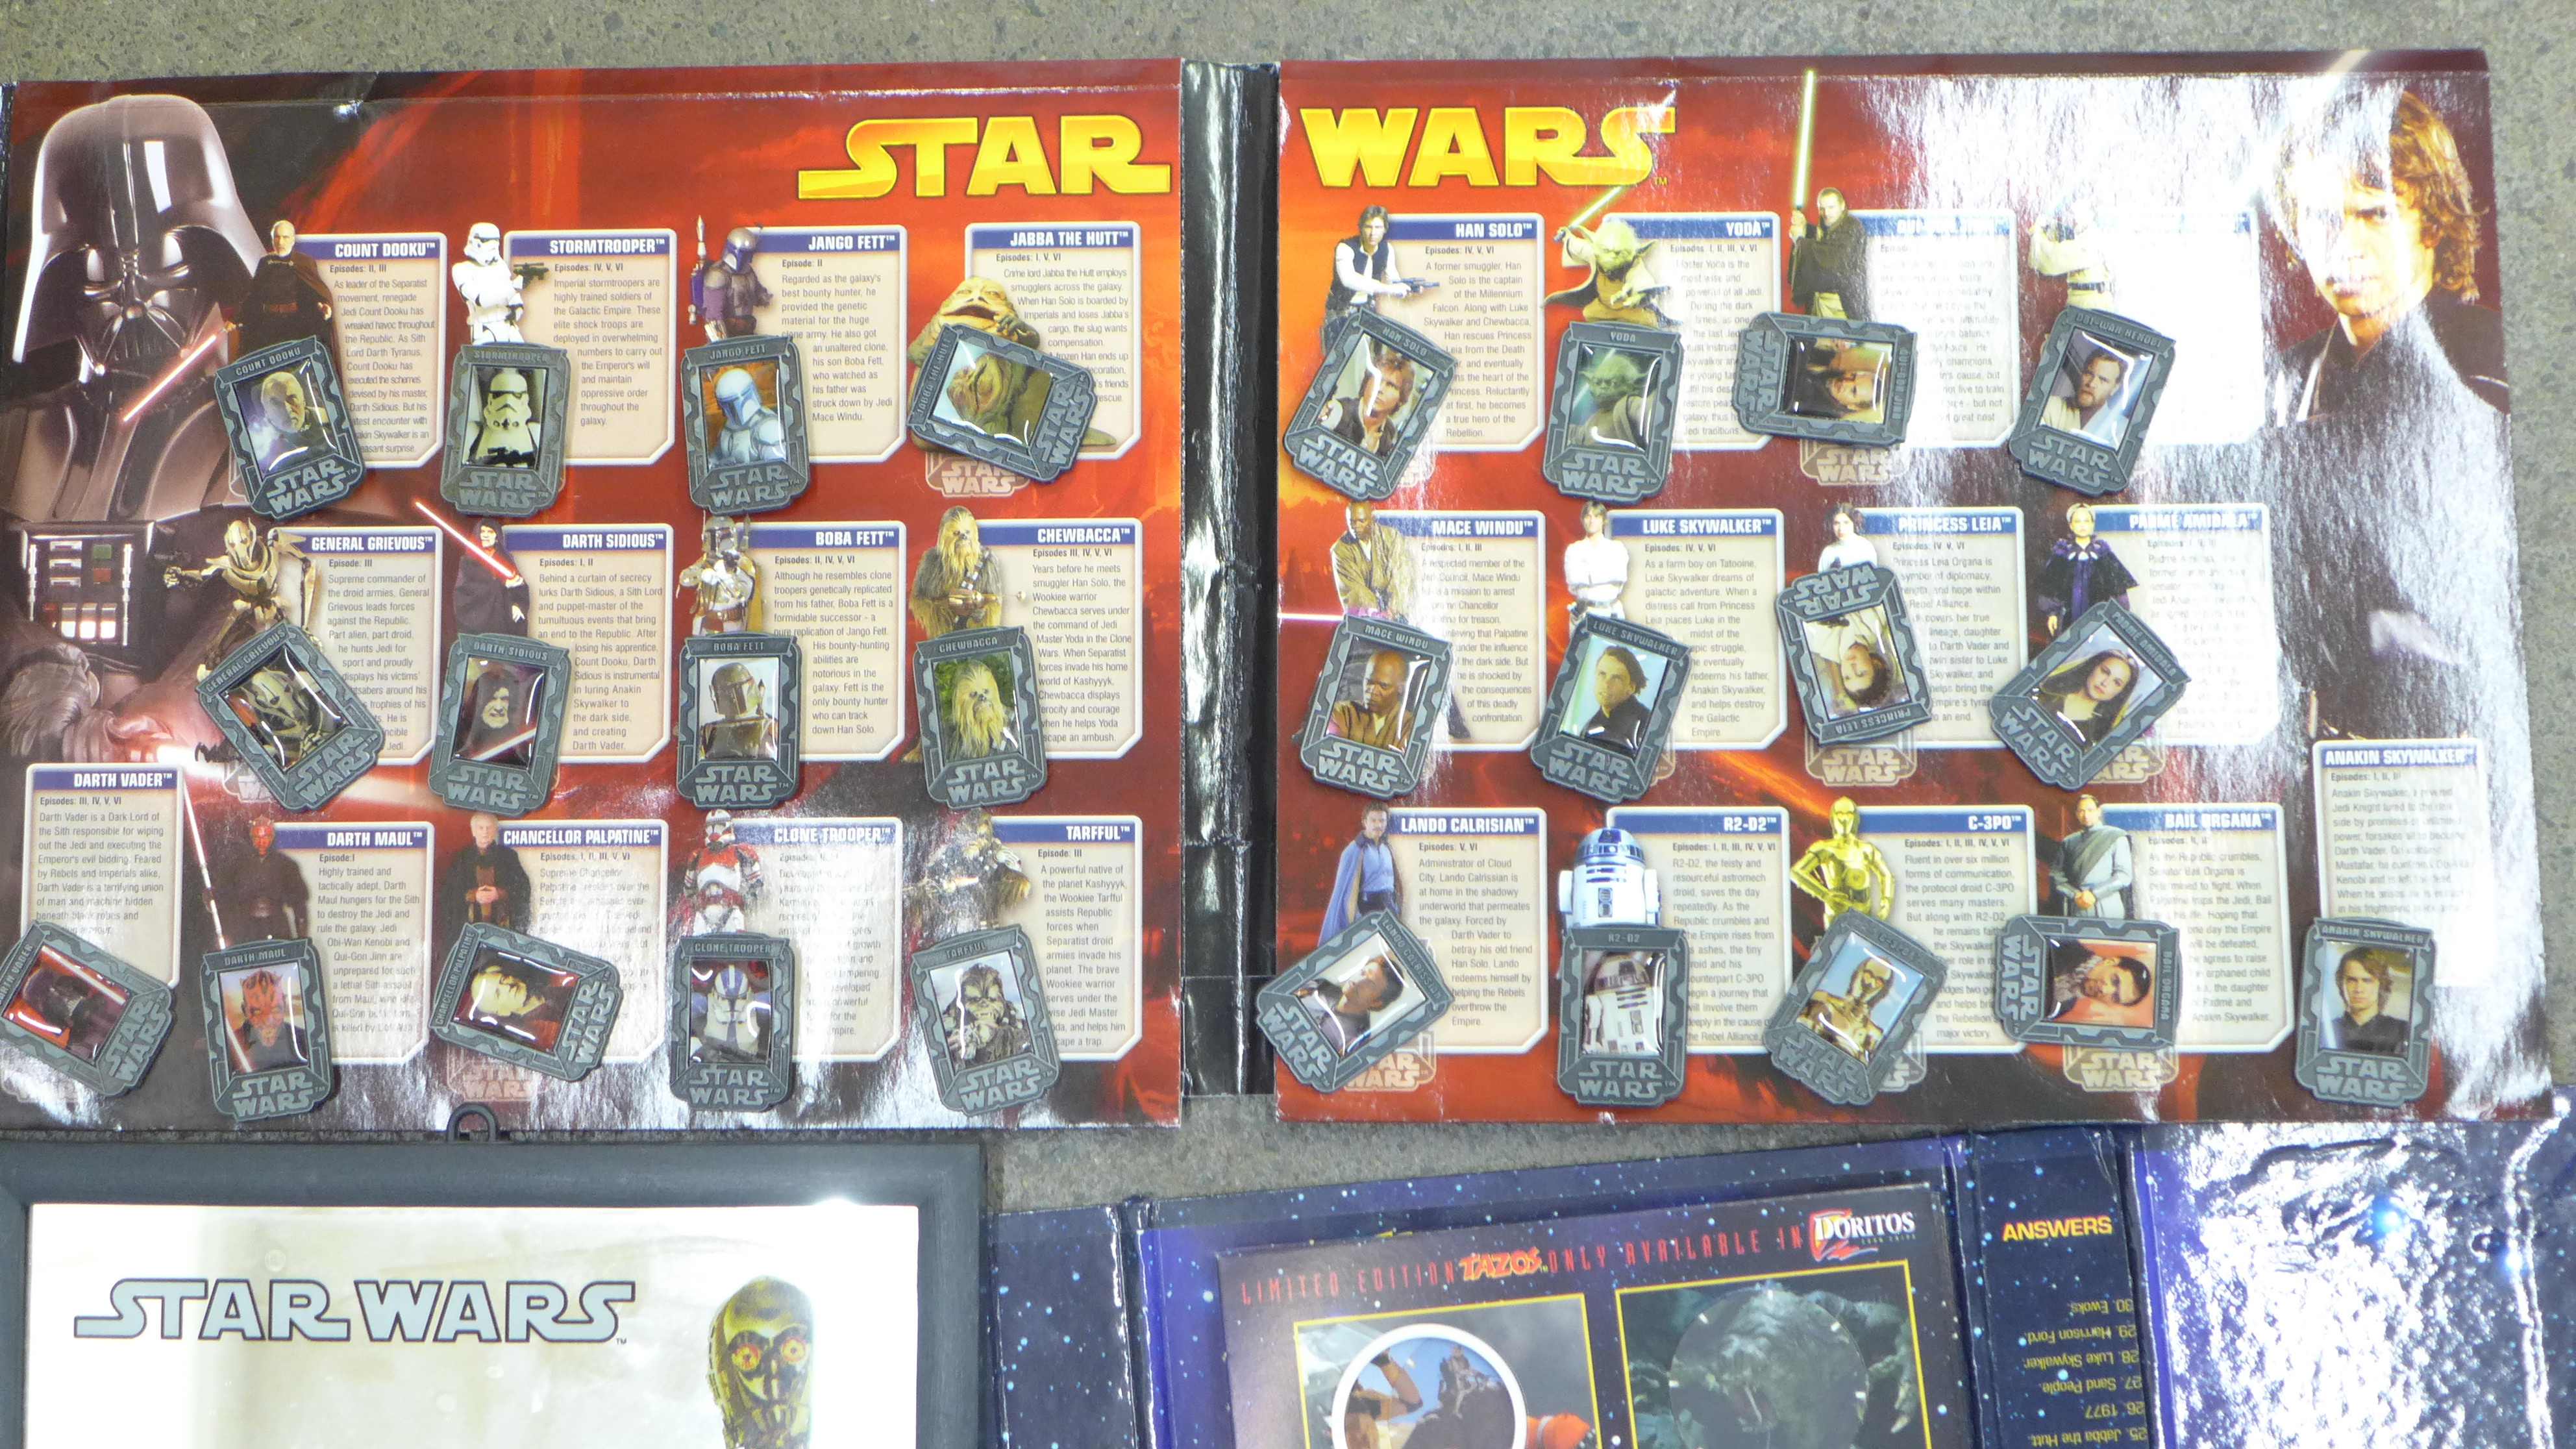 Star Wars Episode III 2005 pin badge collection, Star Wars Tazo pack and a Star Wars mirror - Image 2 of 3